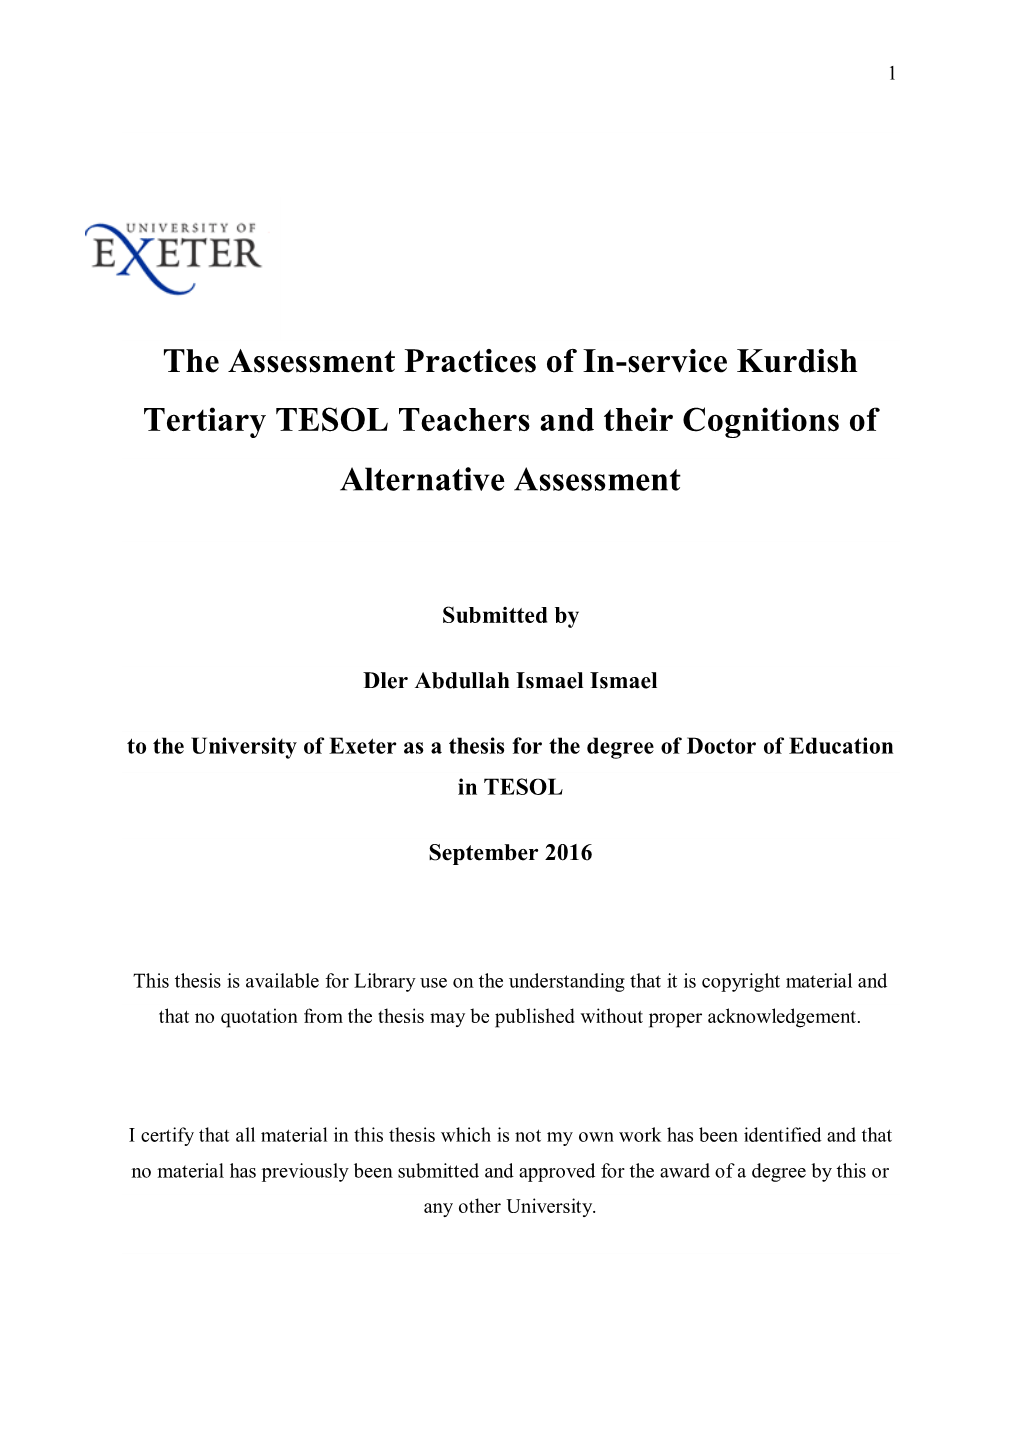 The Assessment Practices of In-Service Kurdish Tertiary TESOL Teachers and Their Cognitions of Alternative Assessment